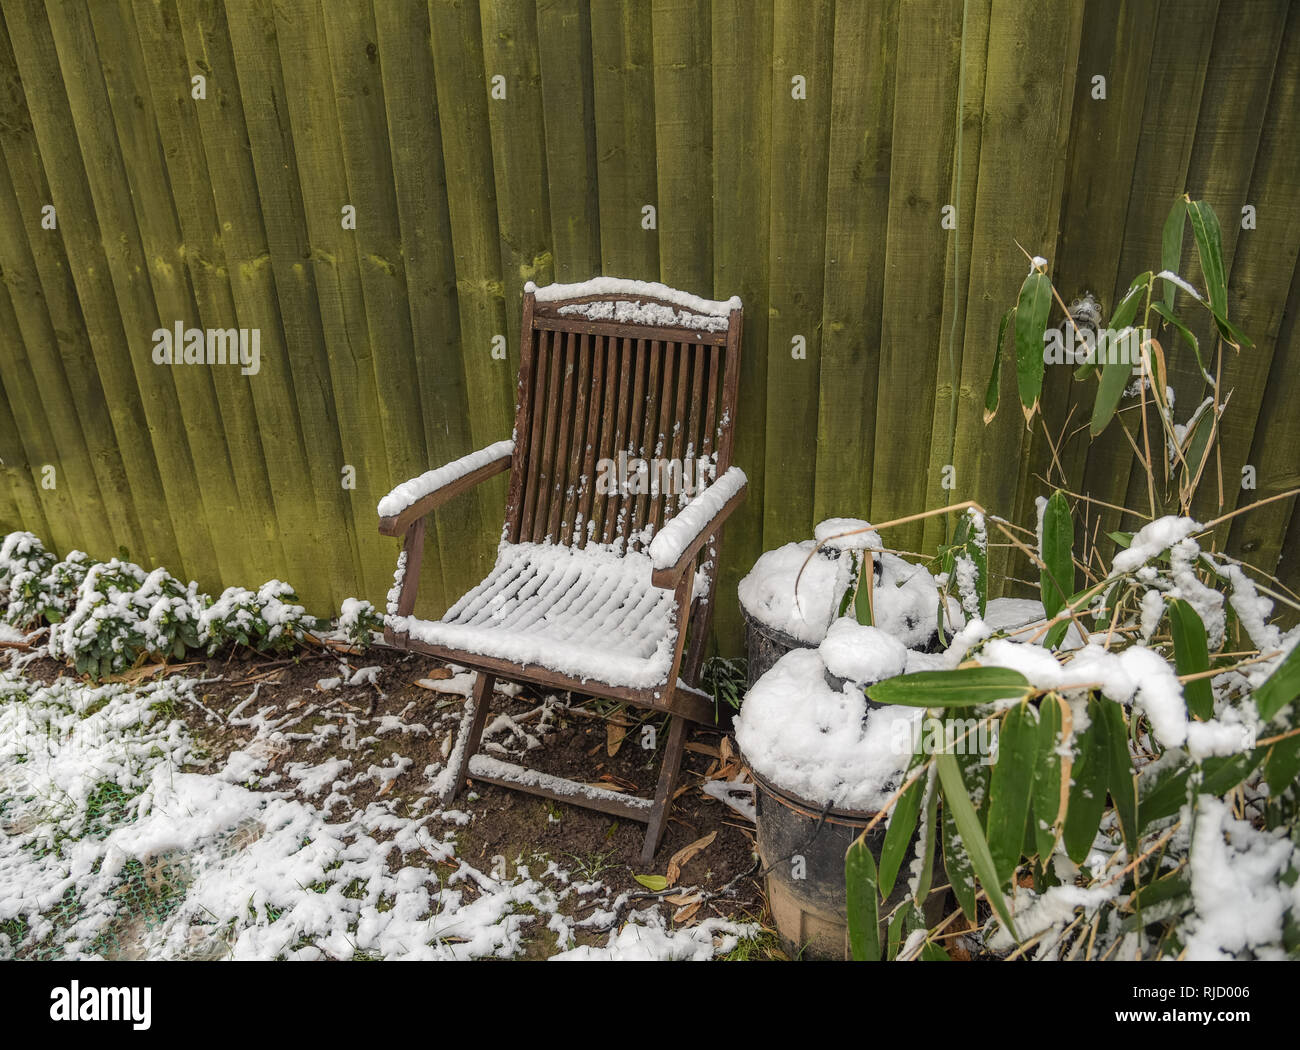 Wooden garden chair covered with snow.  Next to a green fence and containers with snow on their lids. Snow on the bushes and ground. Stock Photo